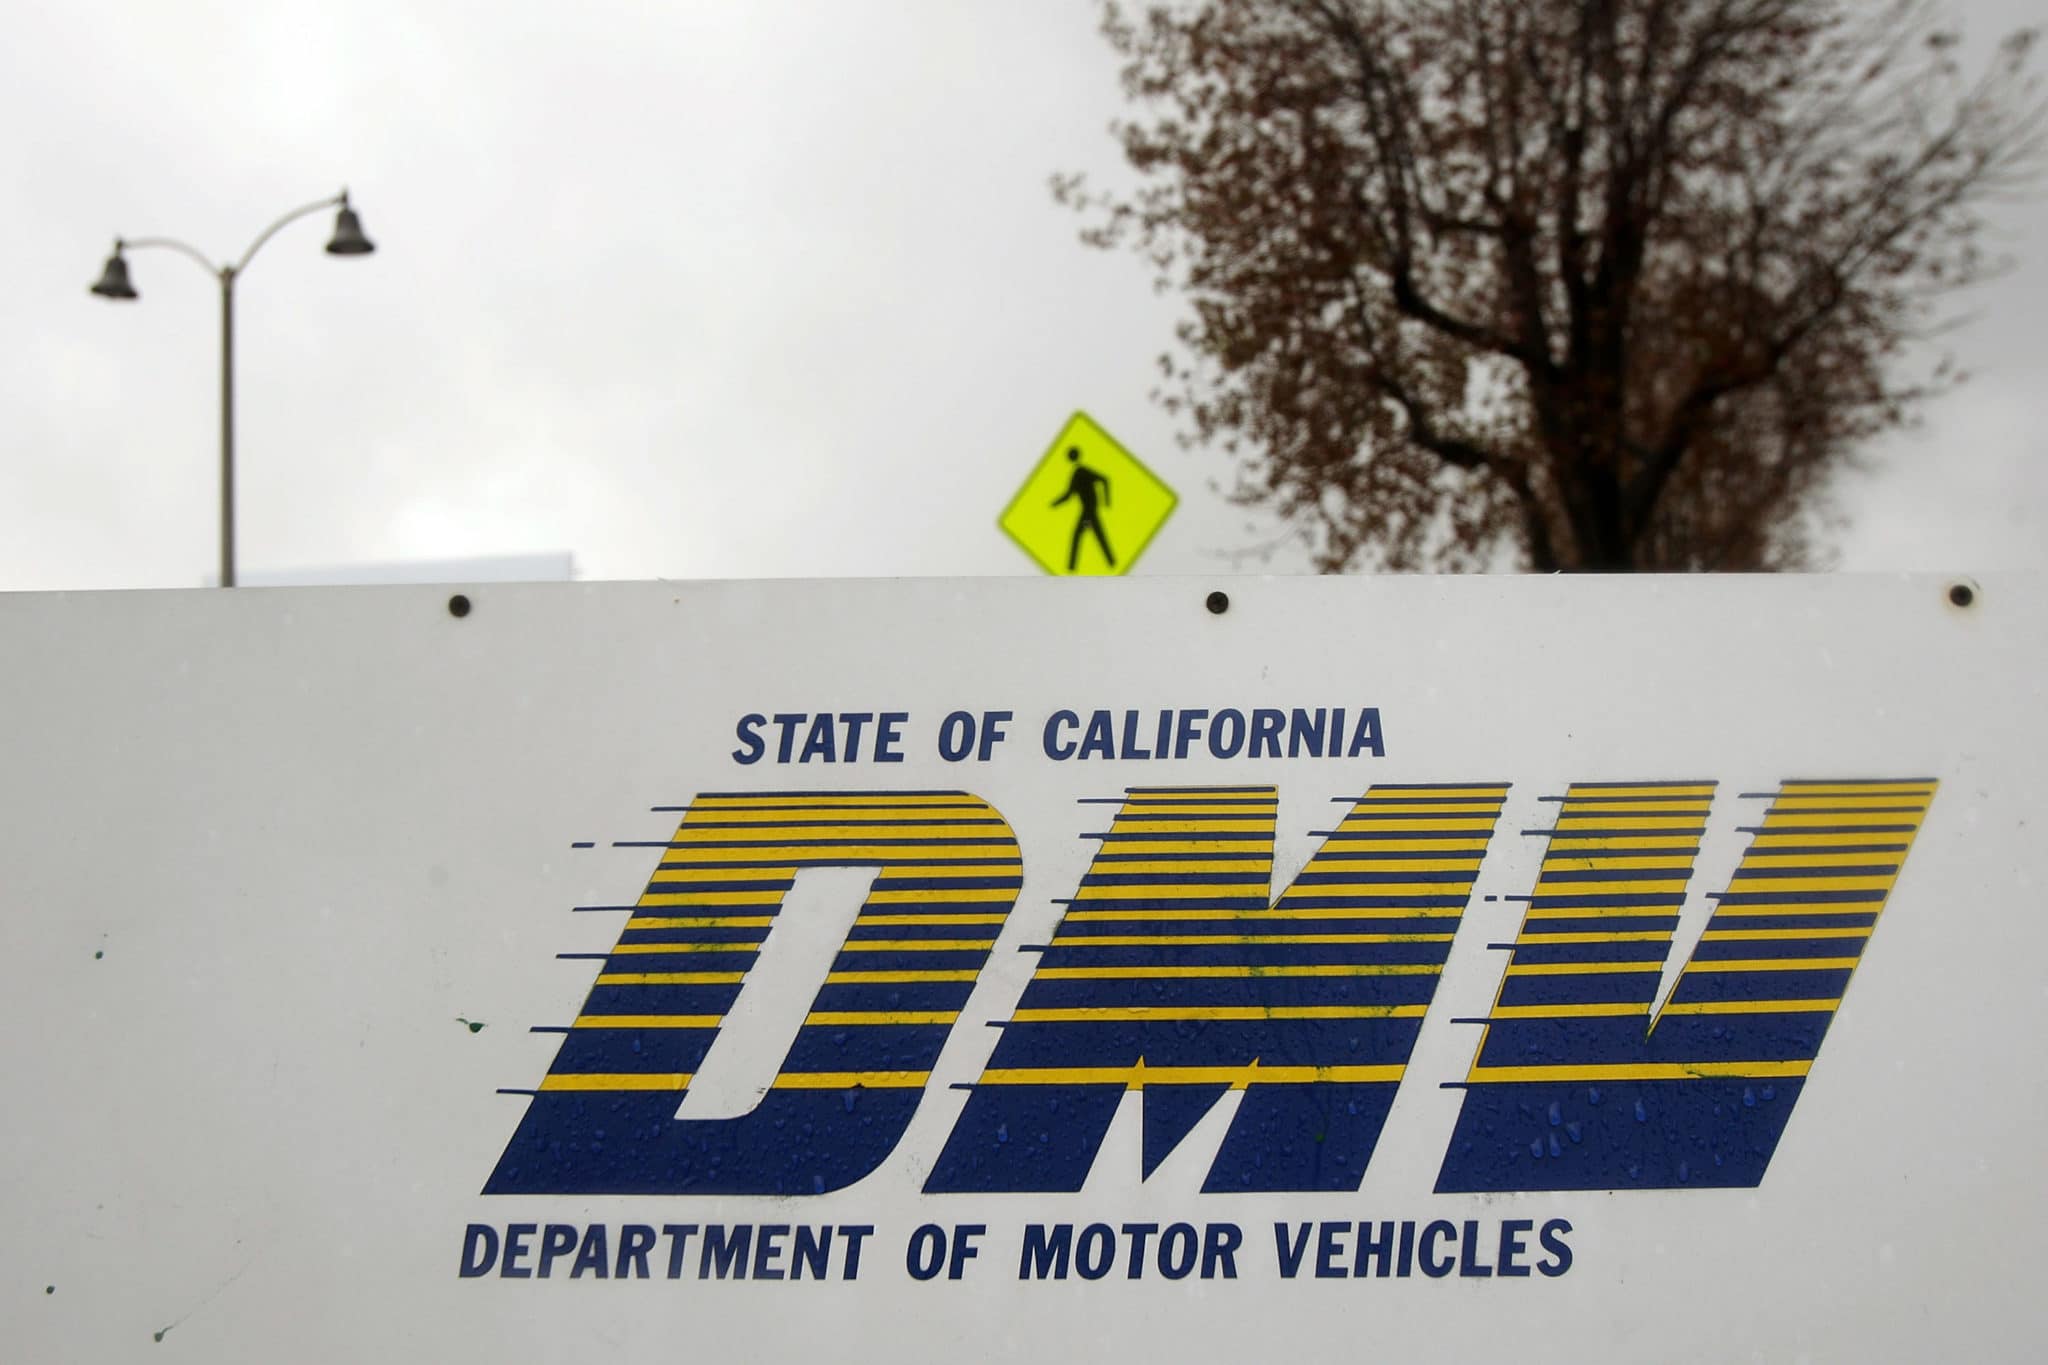 A gay man took on the California Department of Motor Vehicles (DMV) over the QUEER license plate